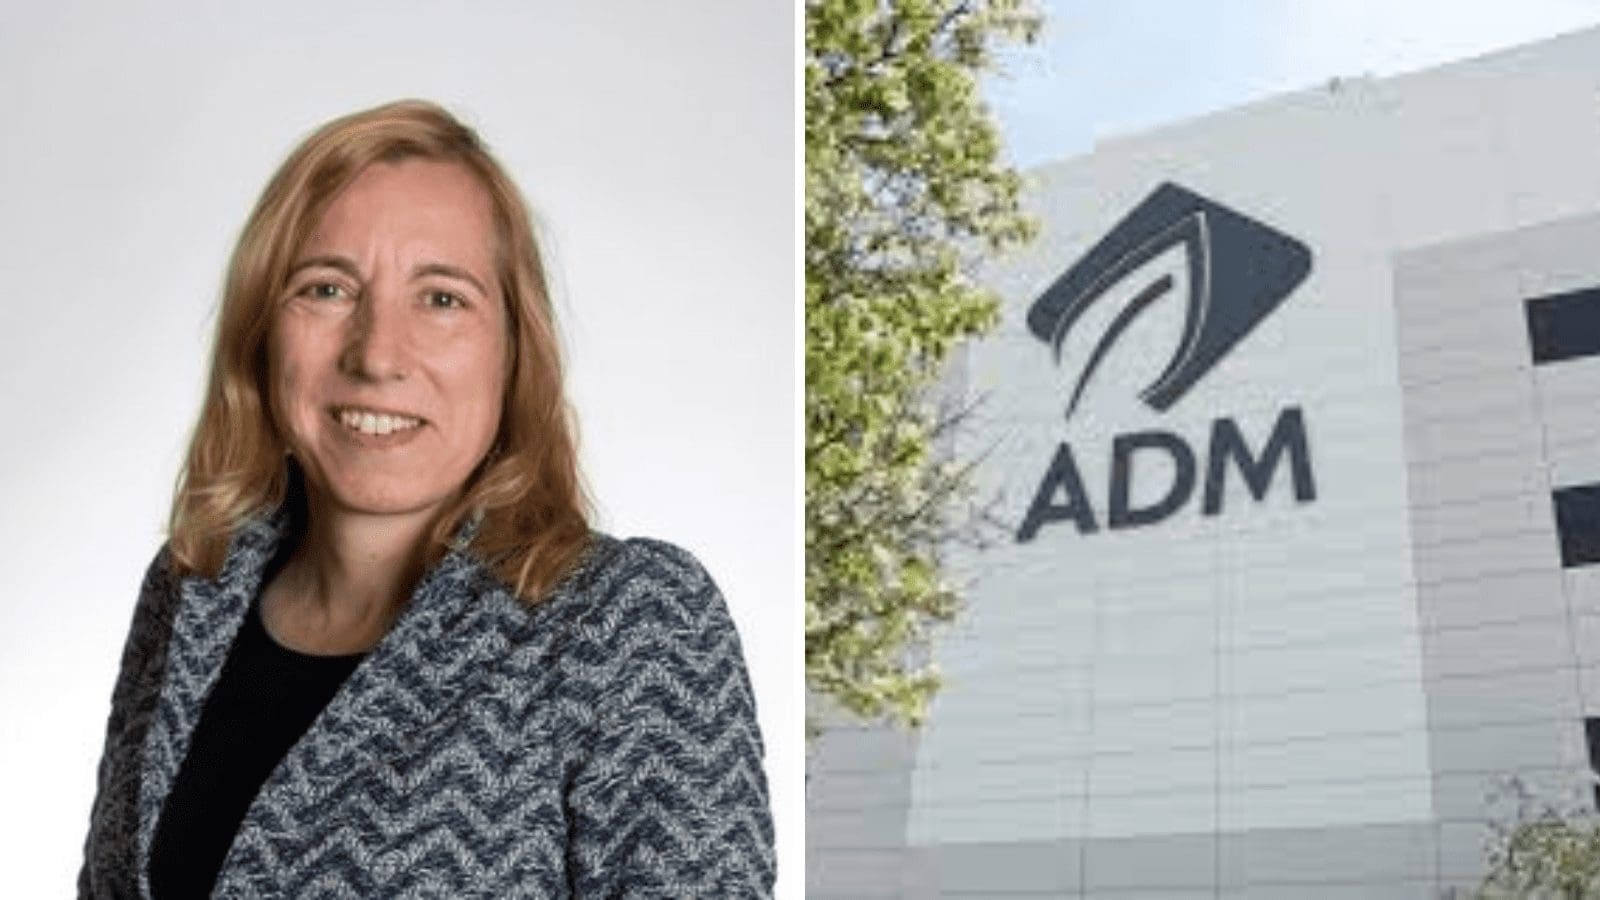 ADM finds new director in Elanco’s de Brabander following election by stockholders 